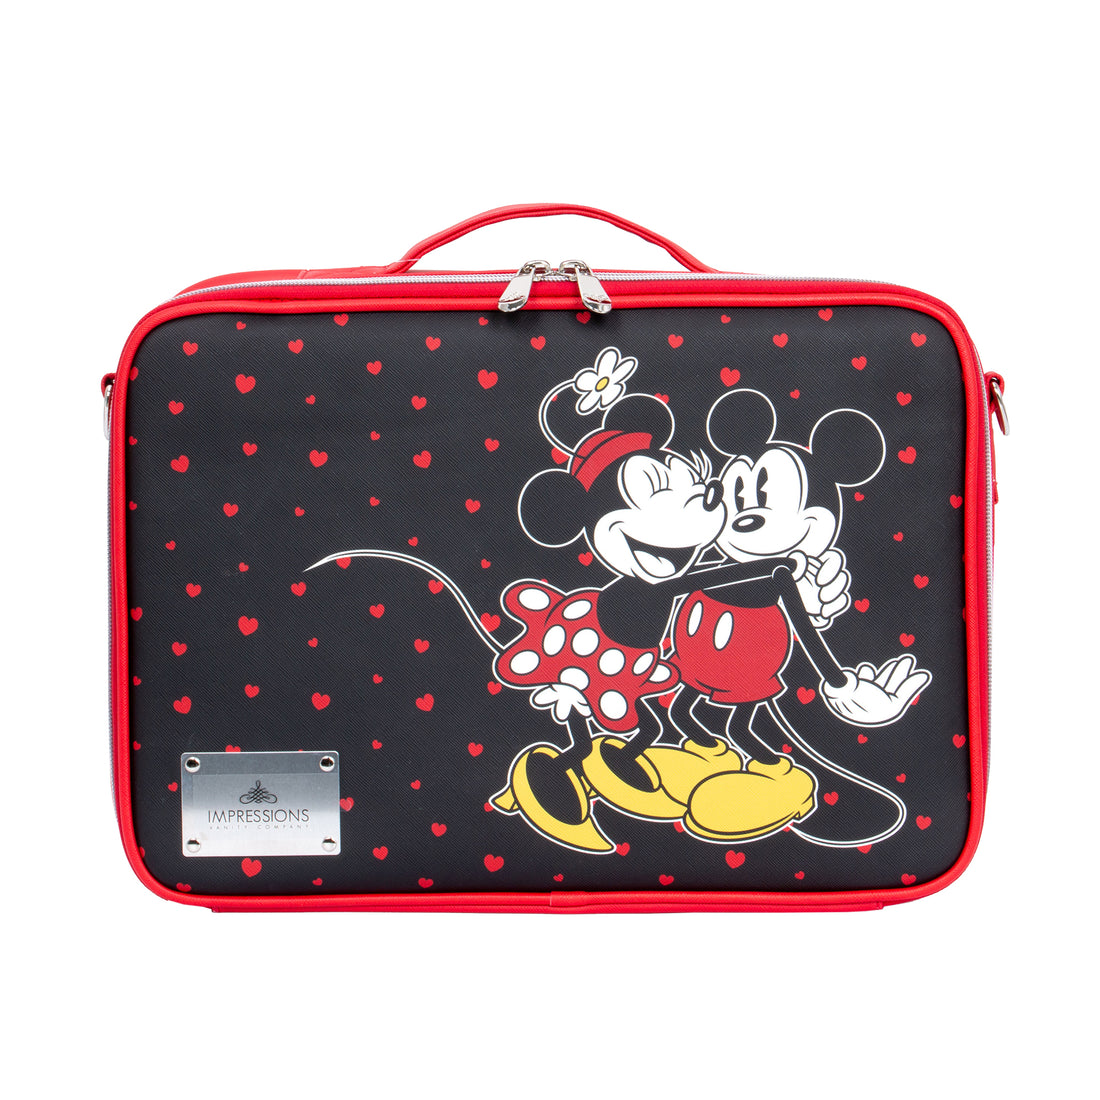 Minnie and Mickey Makeup Carry Case with Adjustable Dividers